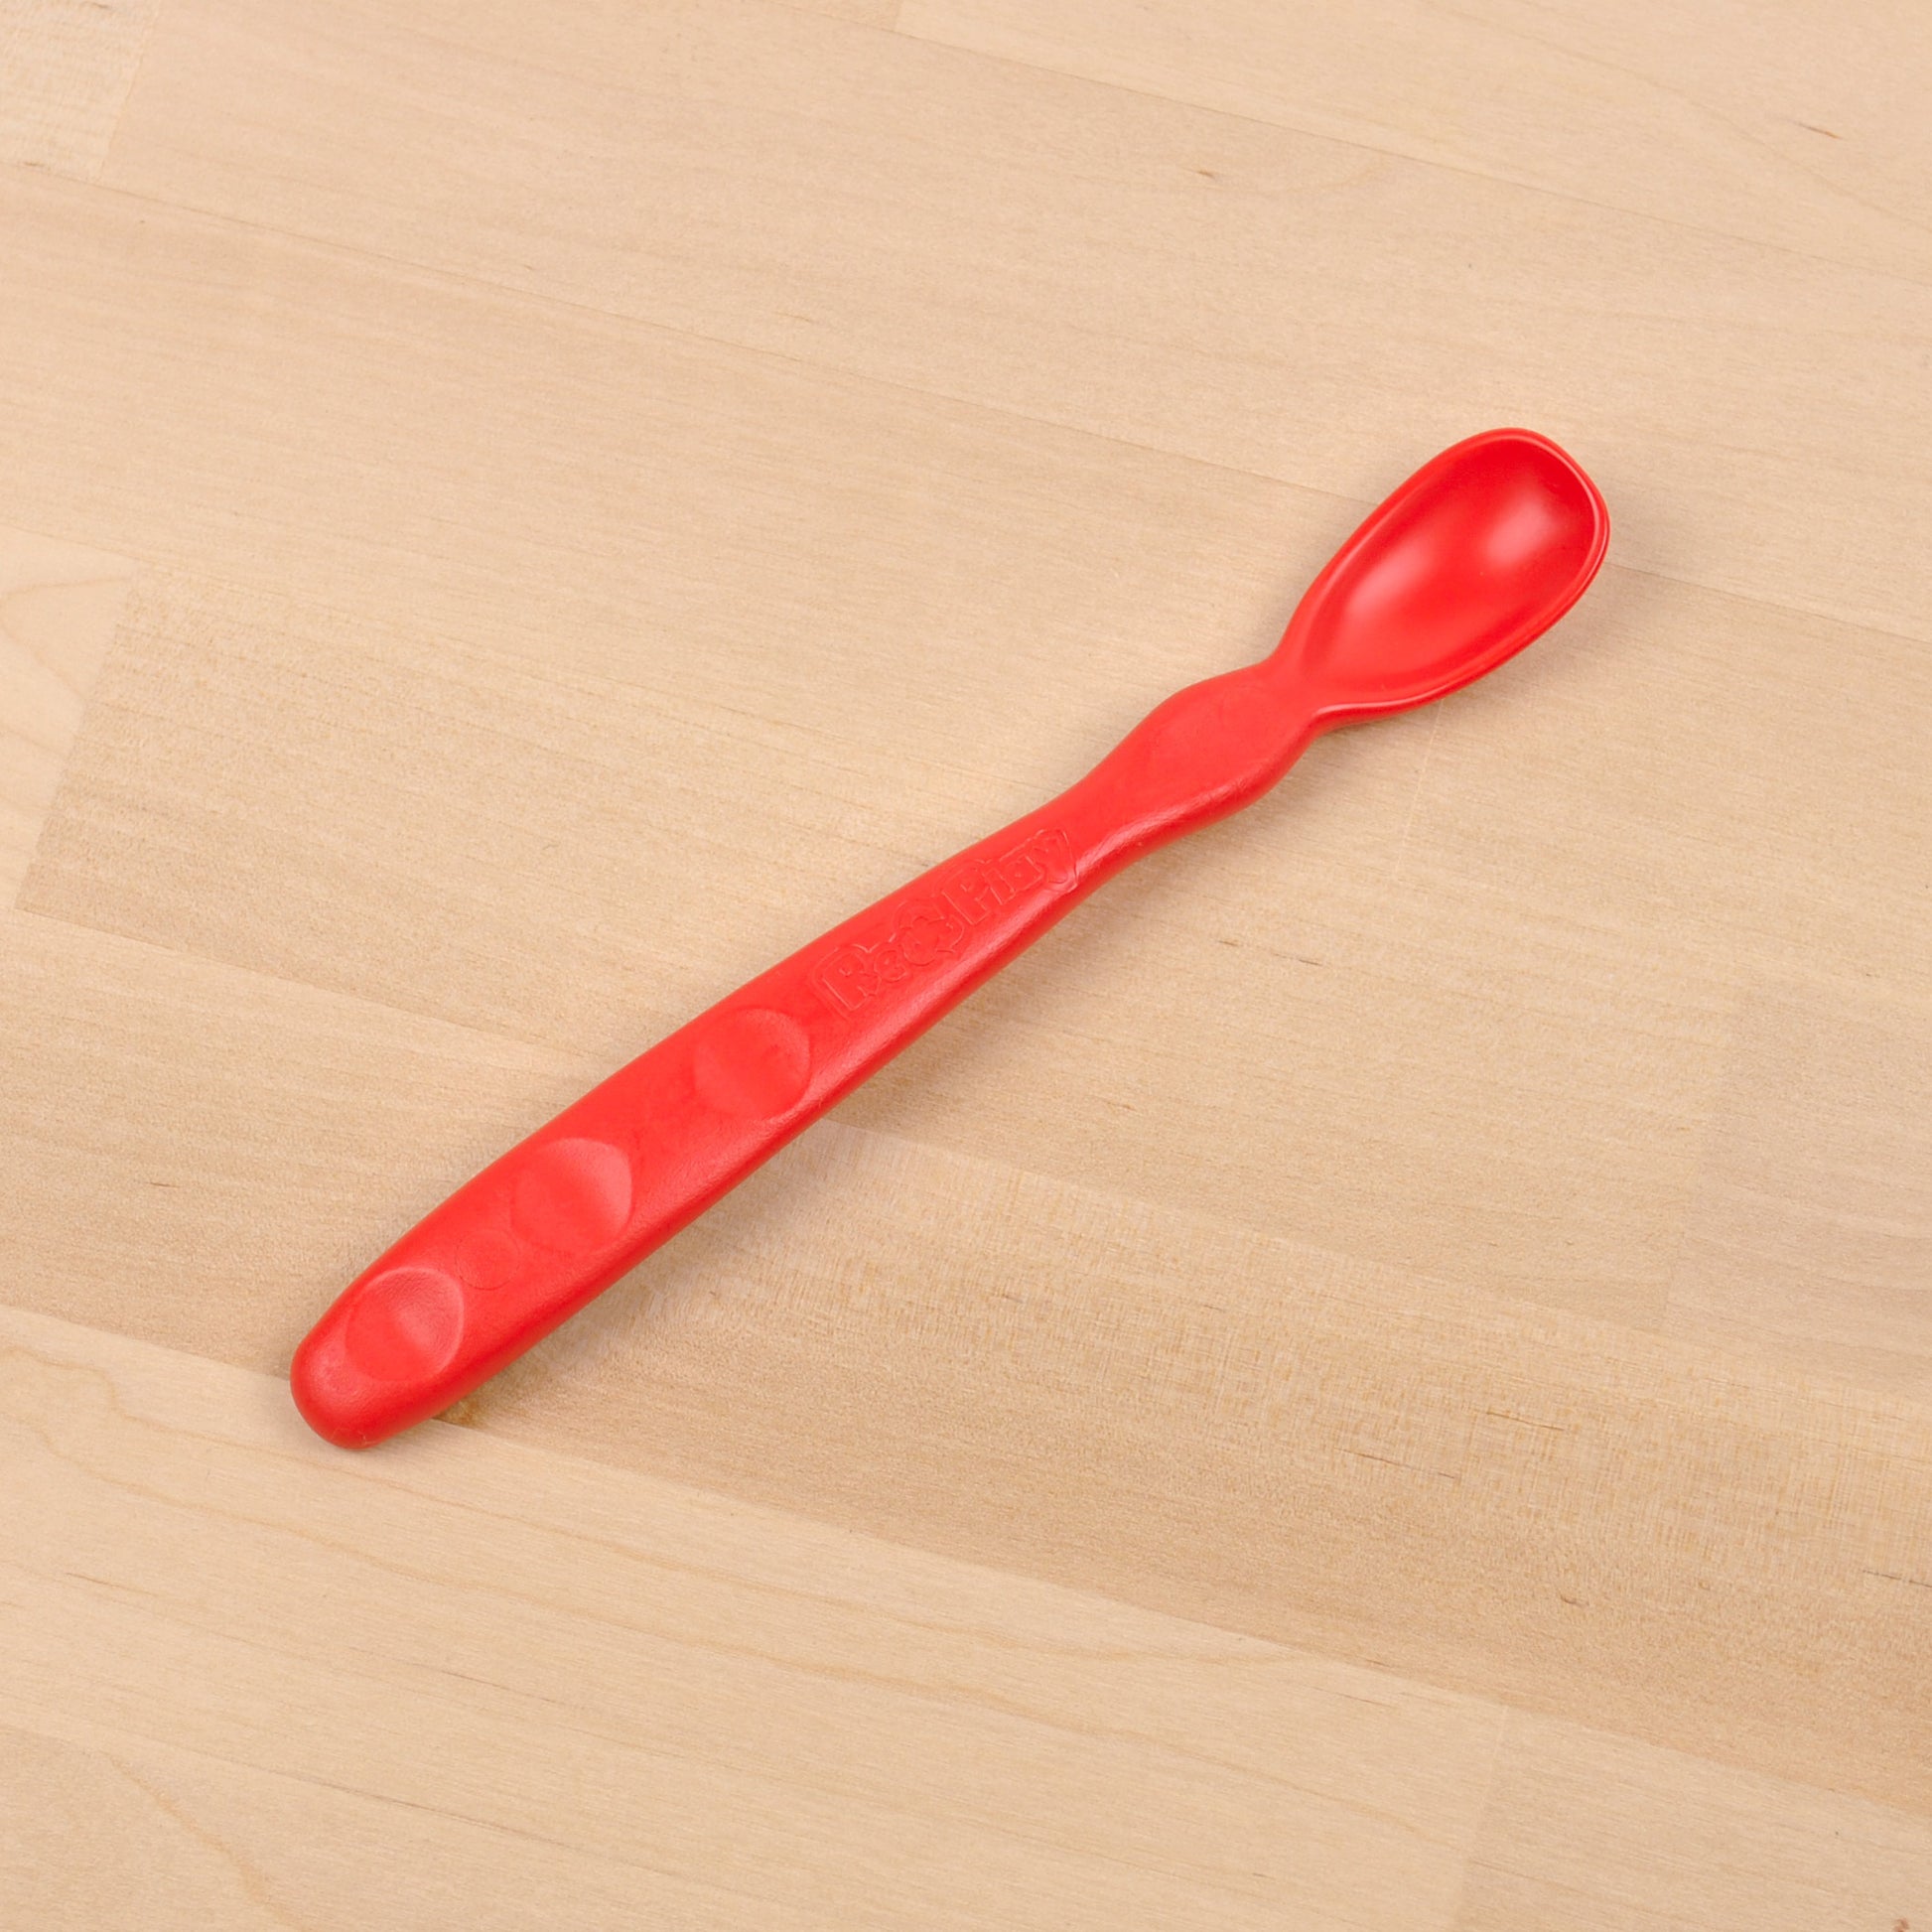 Re-Play Infant Spoon in Red from Bear & Moo